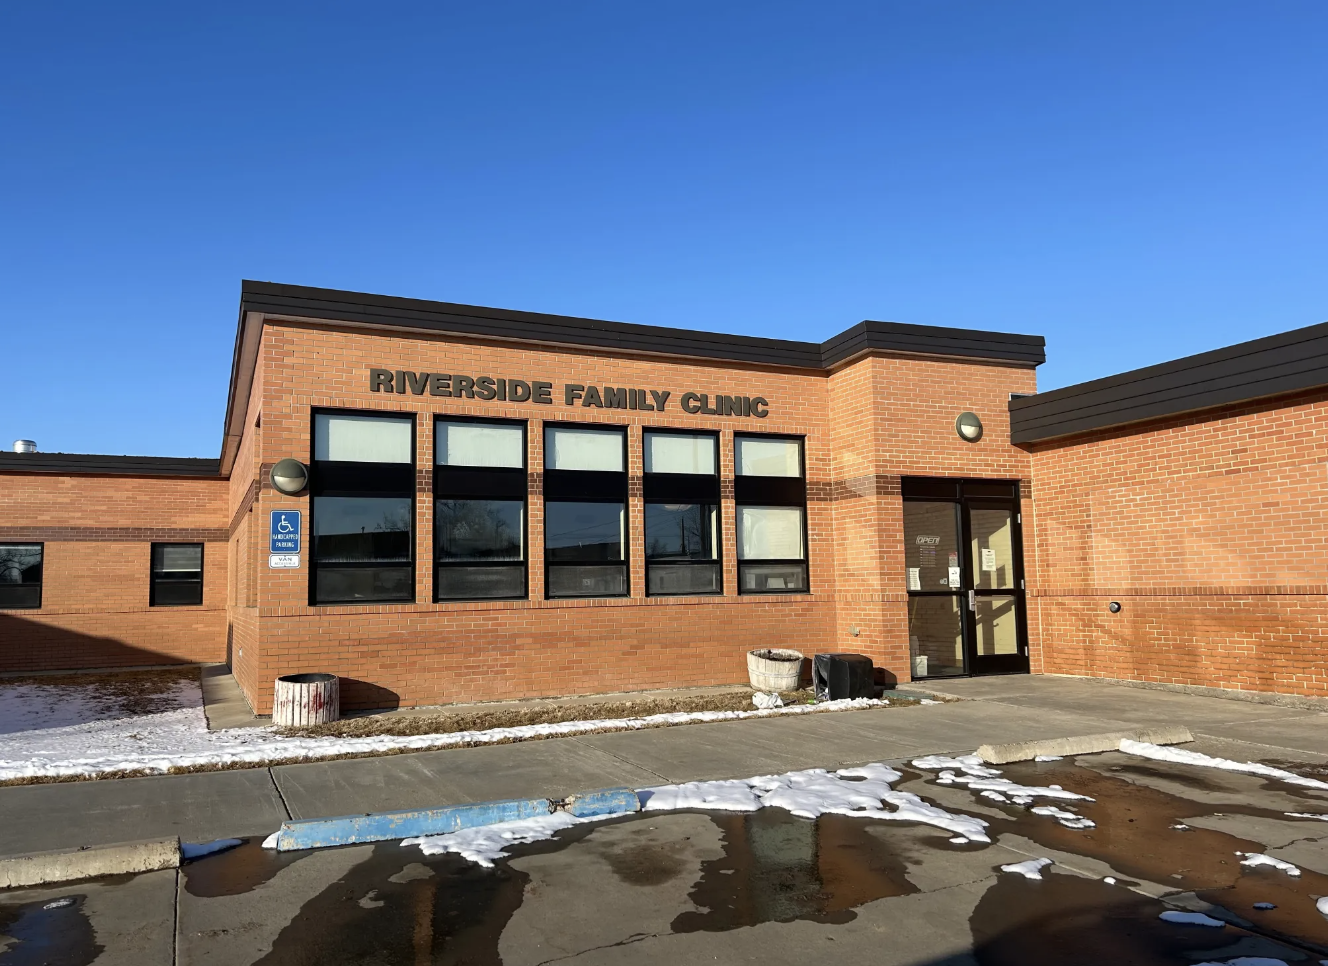 The Riverside Family Clinic in Poplar, one of the locations of Northeast Montana Health Services. Credit: Courtesy of Natalie Van Houten